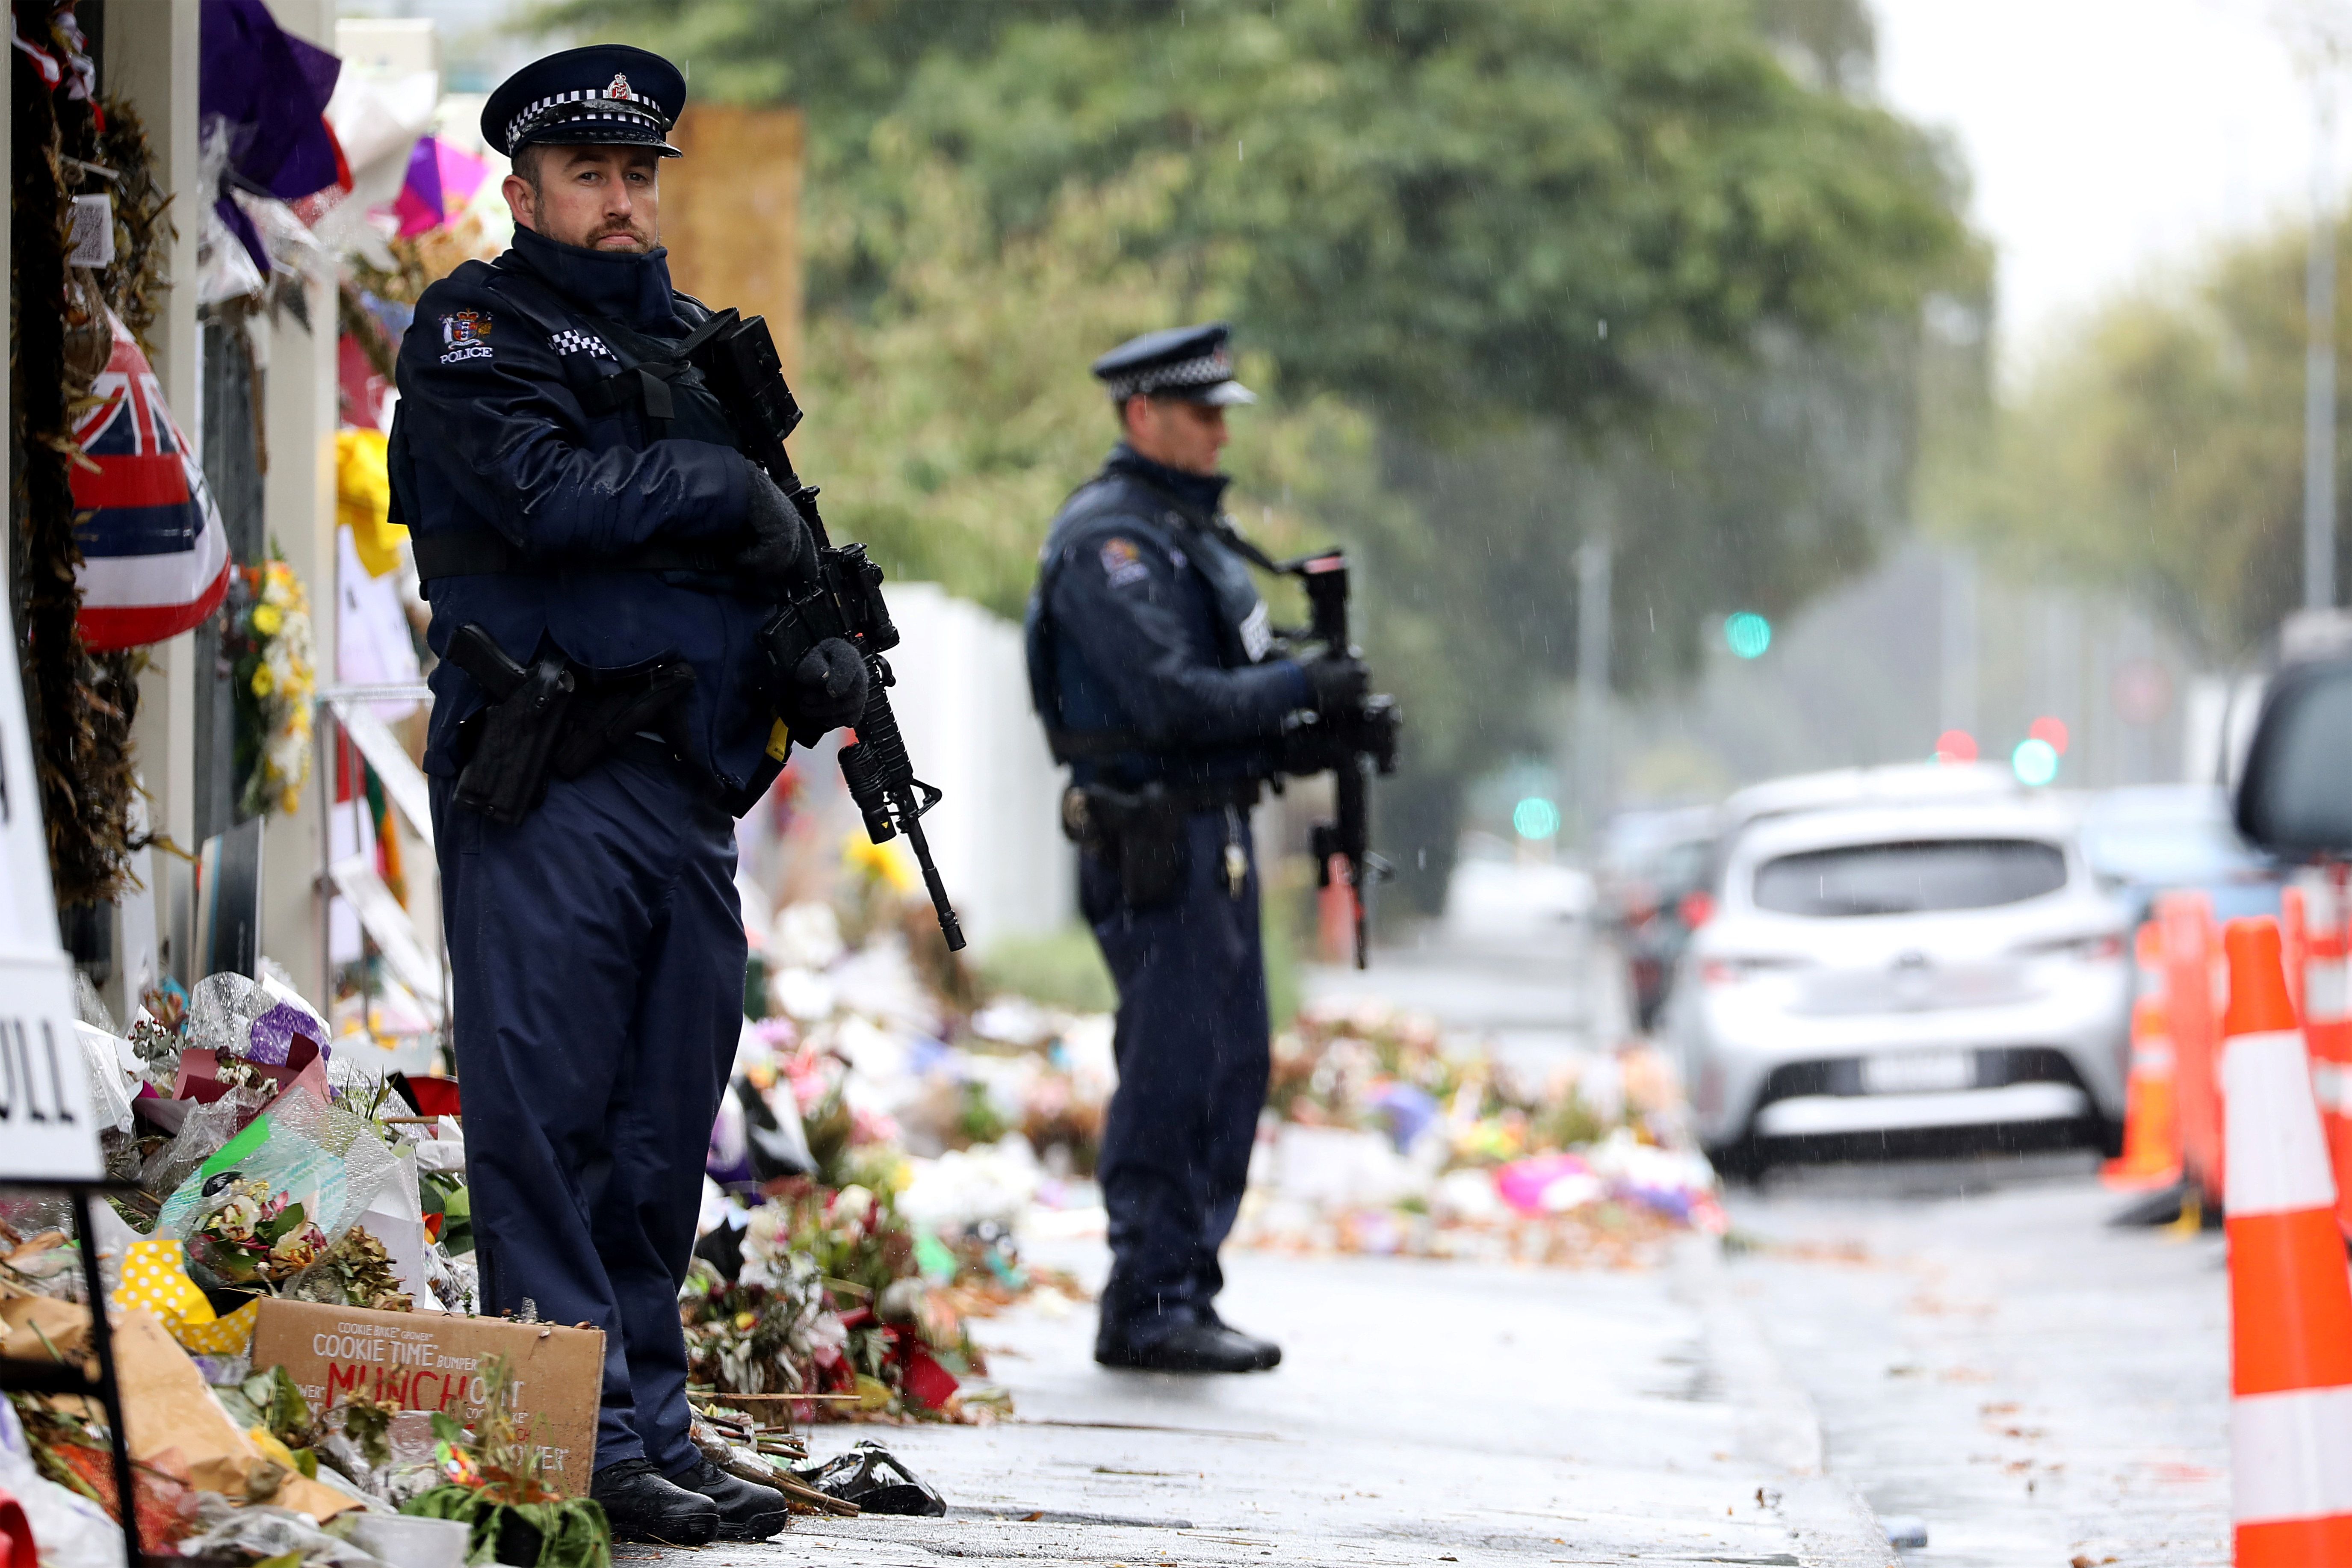 Armed police officers stand guard outside the Al Noor mosque, one of the mosques where some 50 people were killed by a self-avowed white supremacist gunman on March 15, in Christchurch on April 5, 2019. (SANKA VIDANAGAMA/AFP/Getty Images)